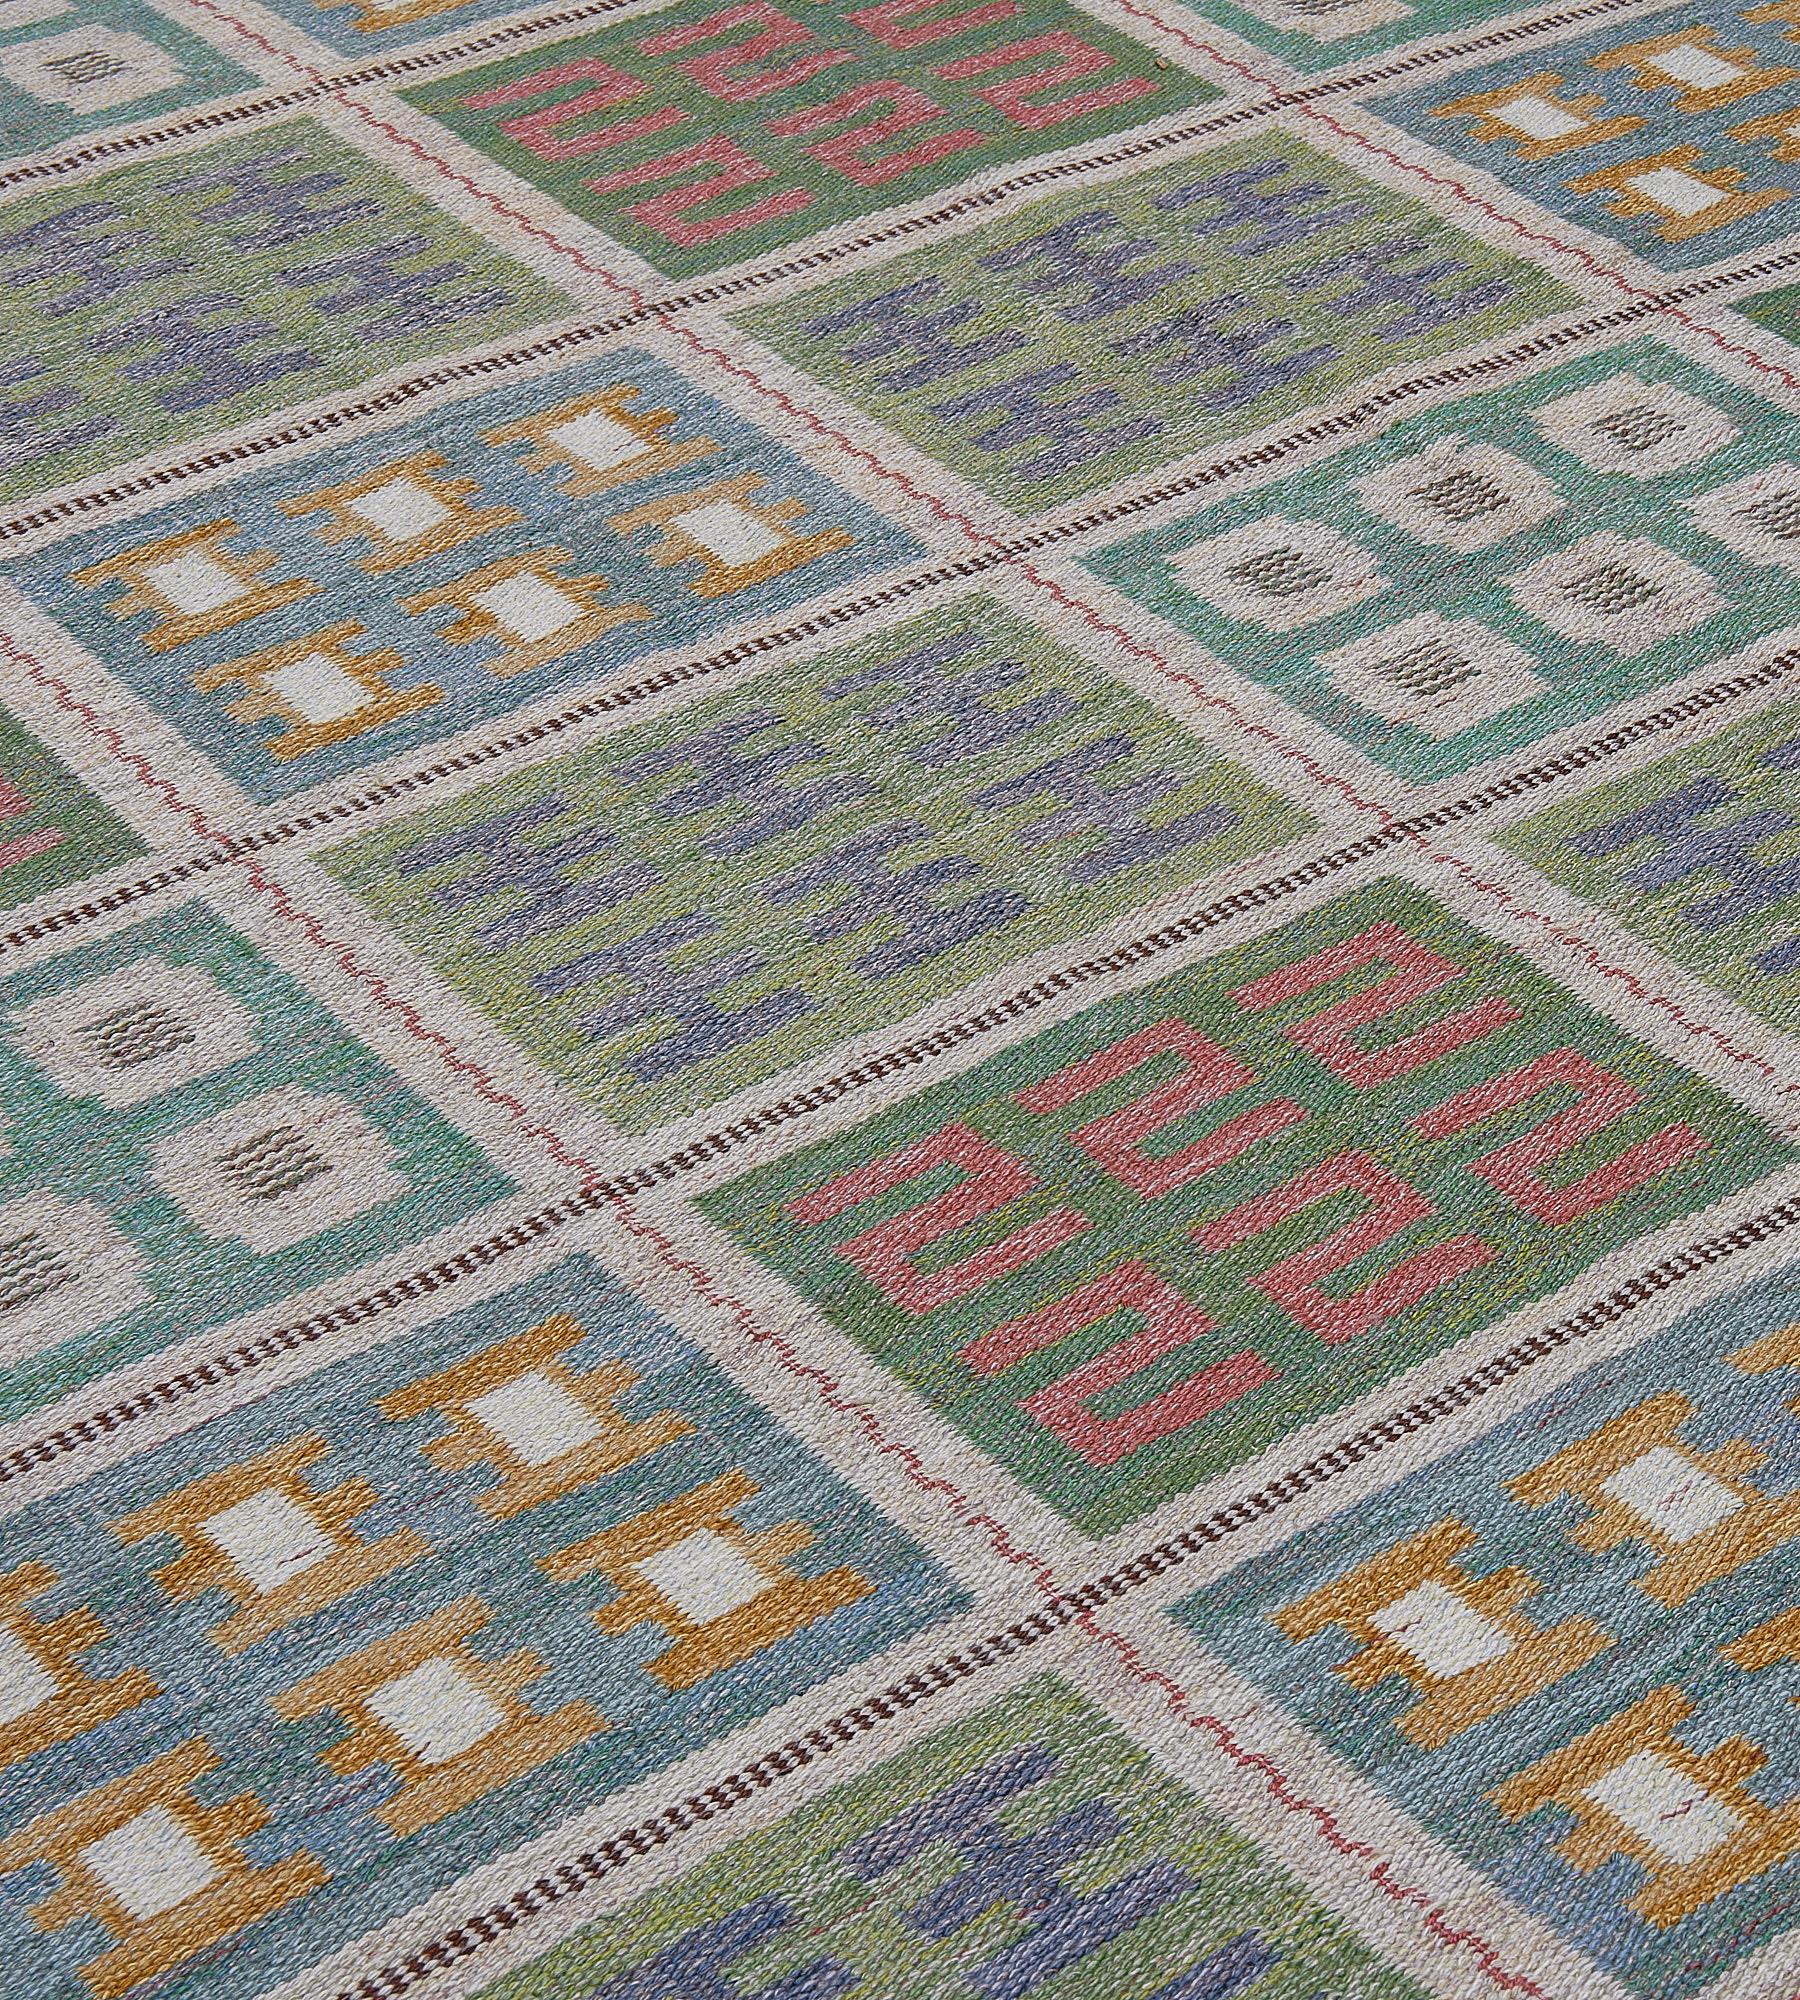 This vintage Swedish flatweave rug has a field with five vertical columns of eight rectangular boxes each containing a sea-green, light blue and moss-green smaller box with a variety of six polychrome different decorative motifs, all linked by an